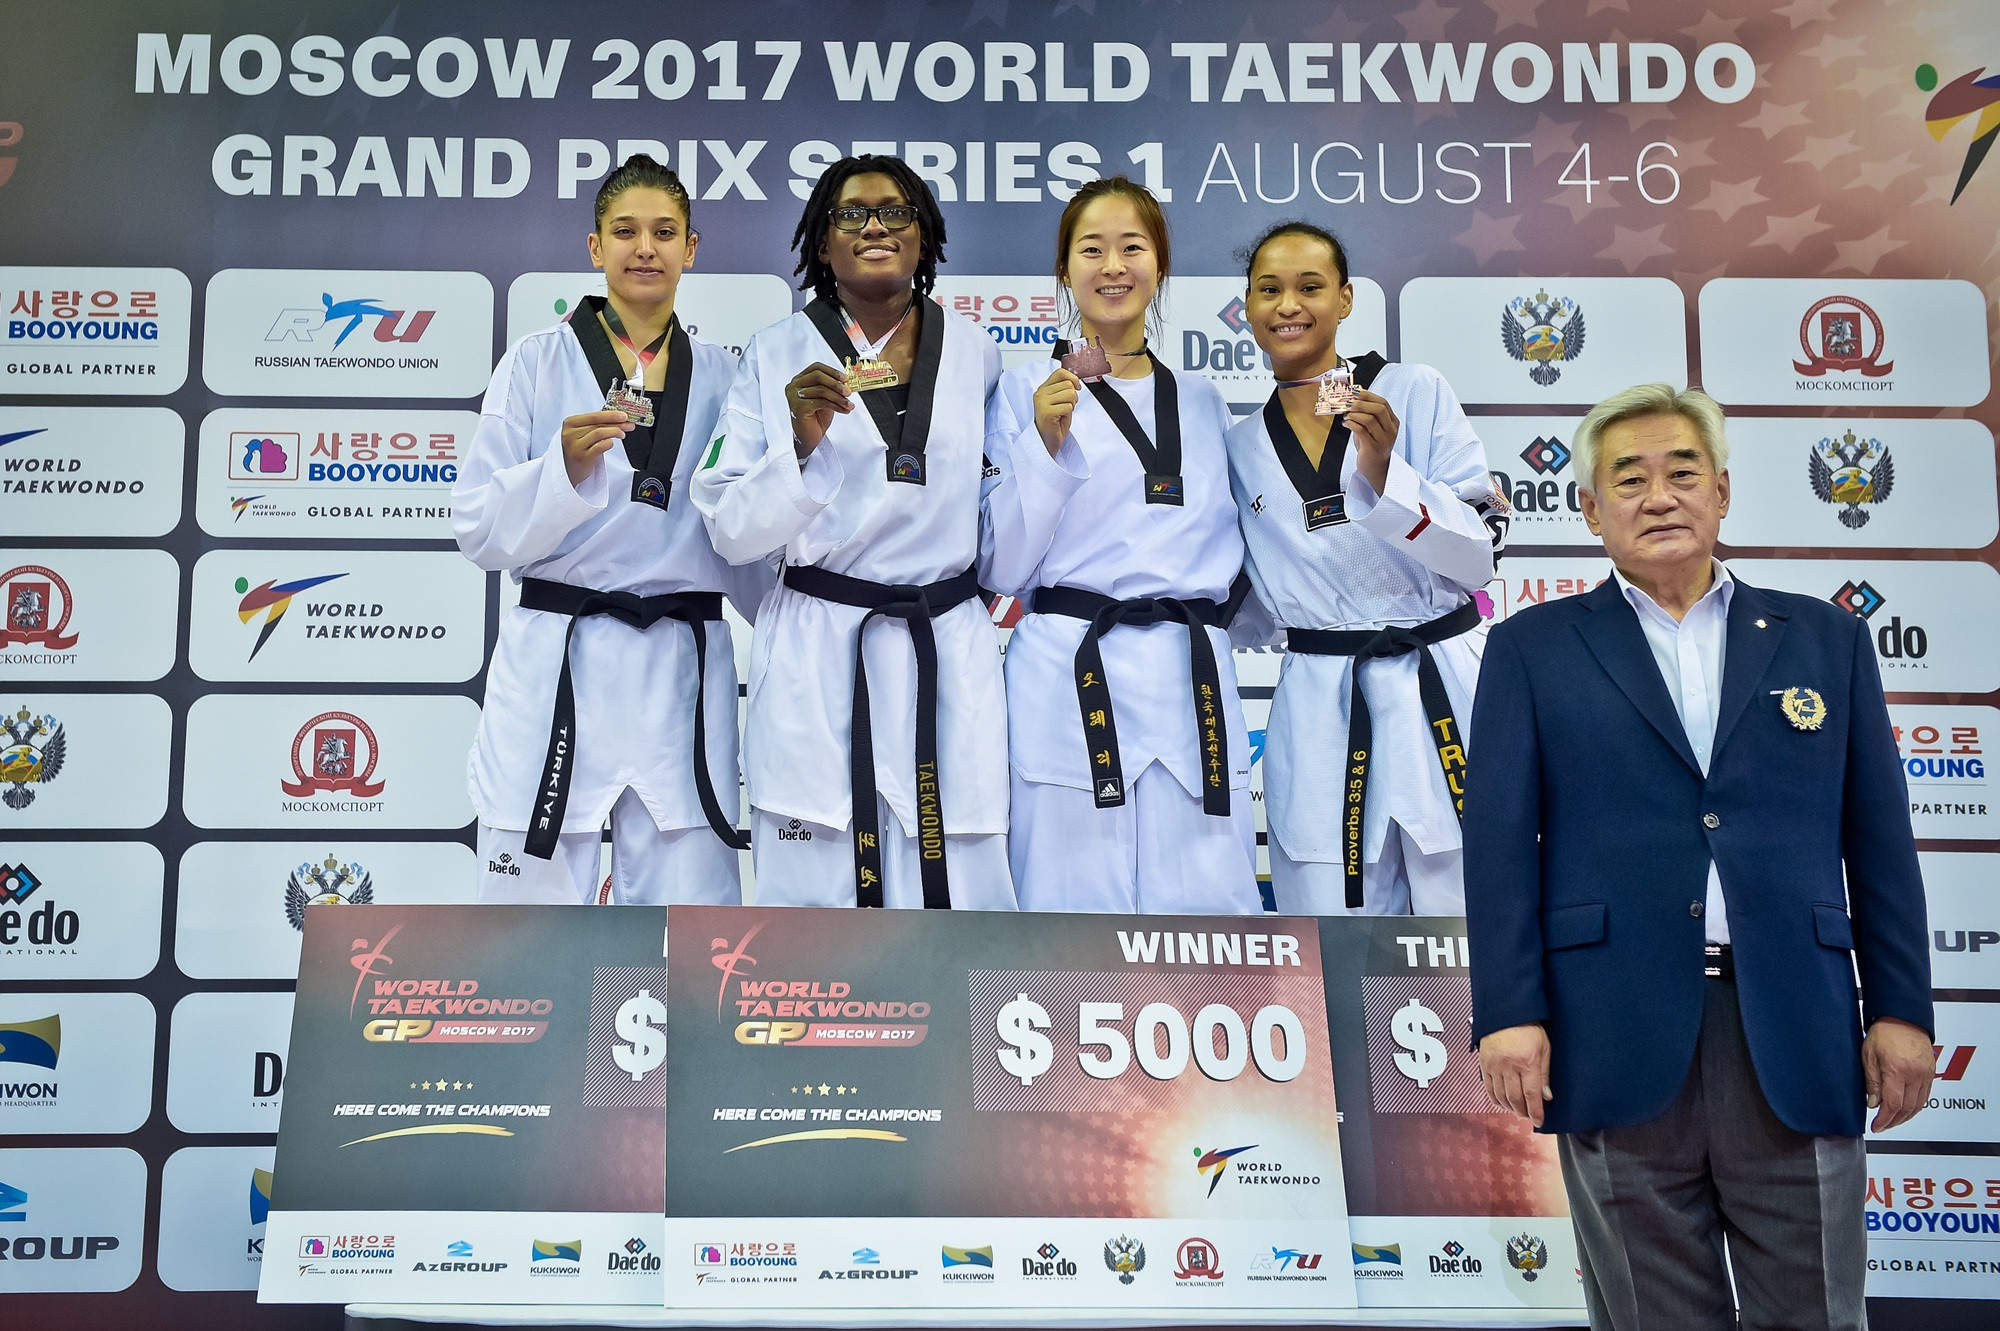 Gbagbi steps up weight class to beat Tatar at World Taekwondo Grand Prix in Moscow